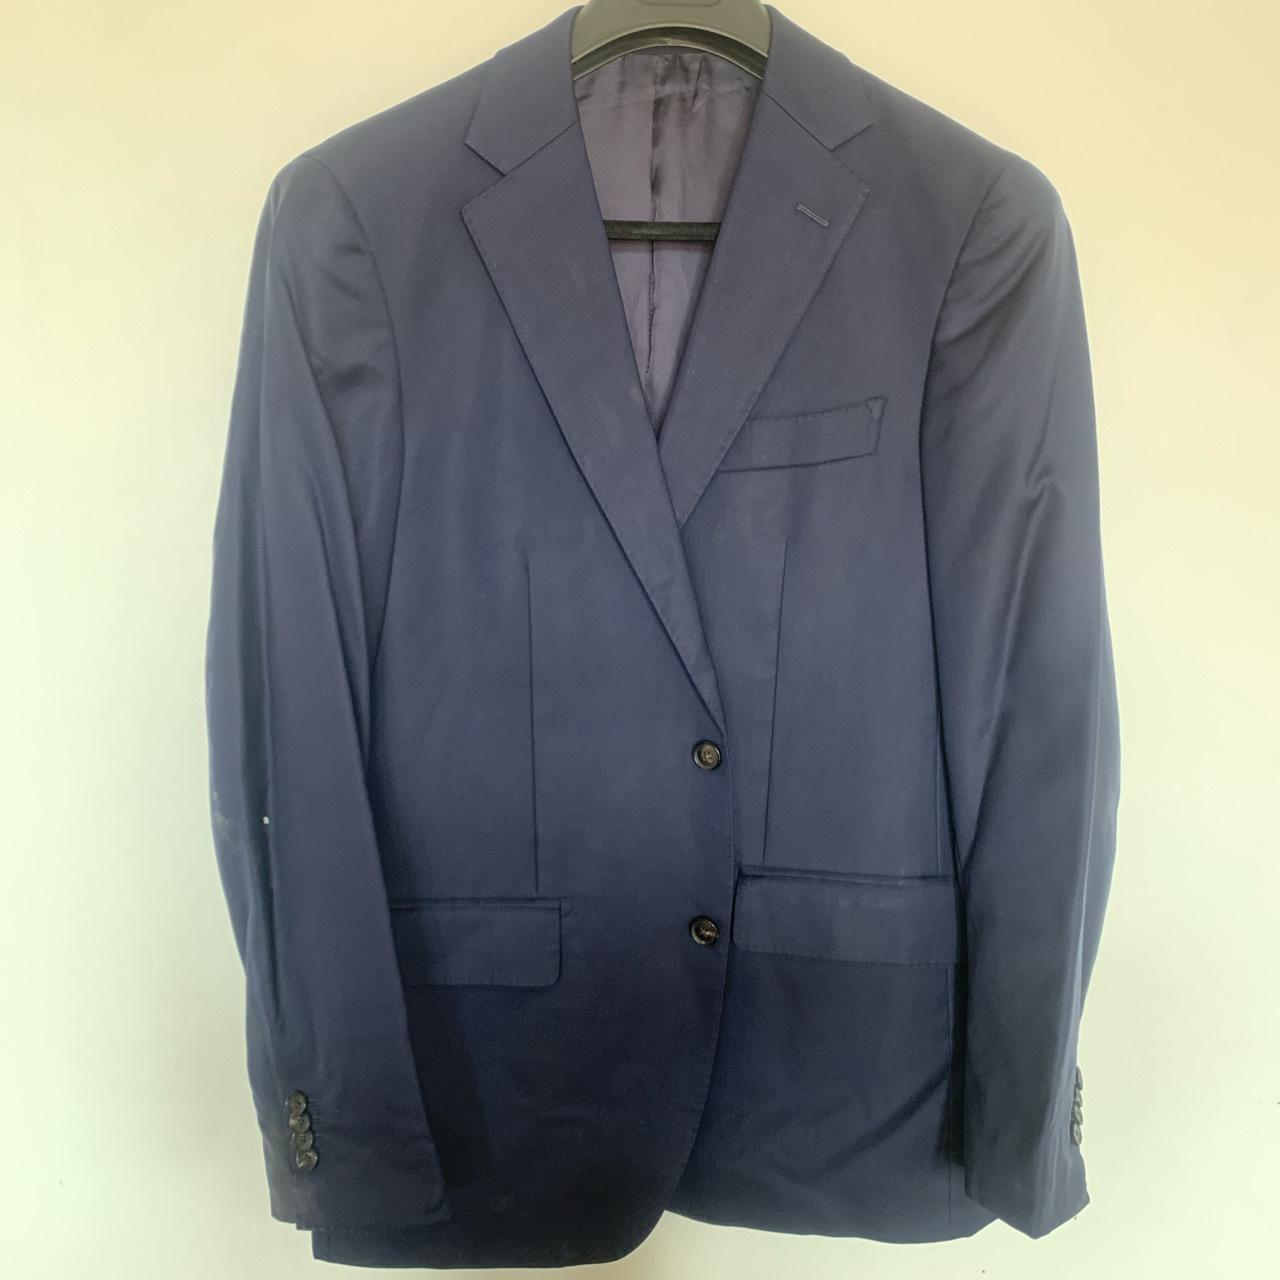 Mj bale navy suit jacket Small stains that can be... - Depop